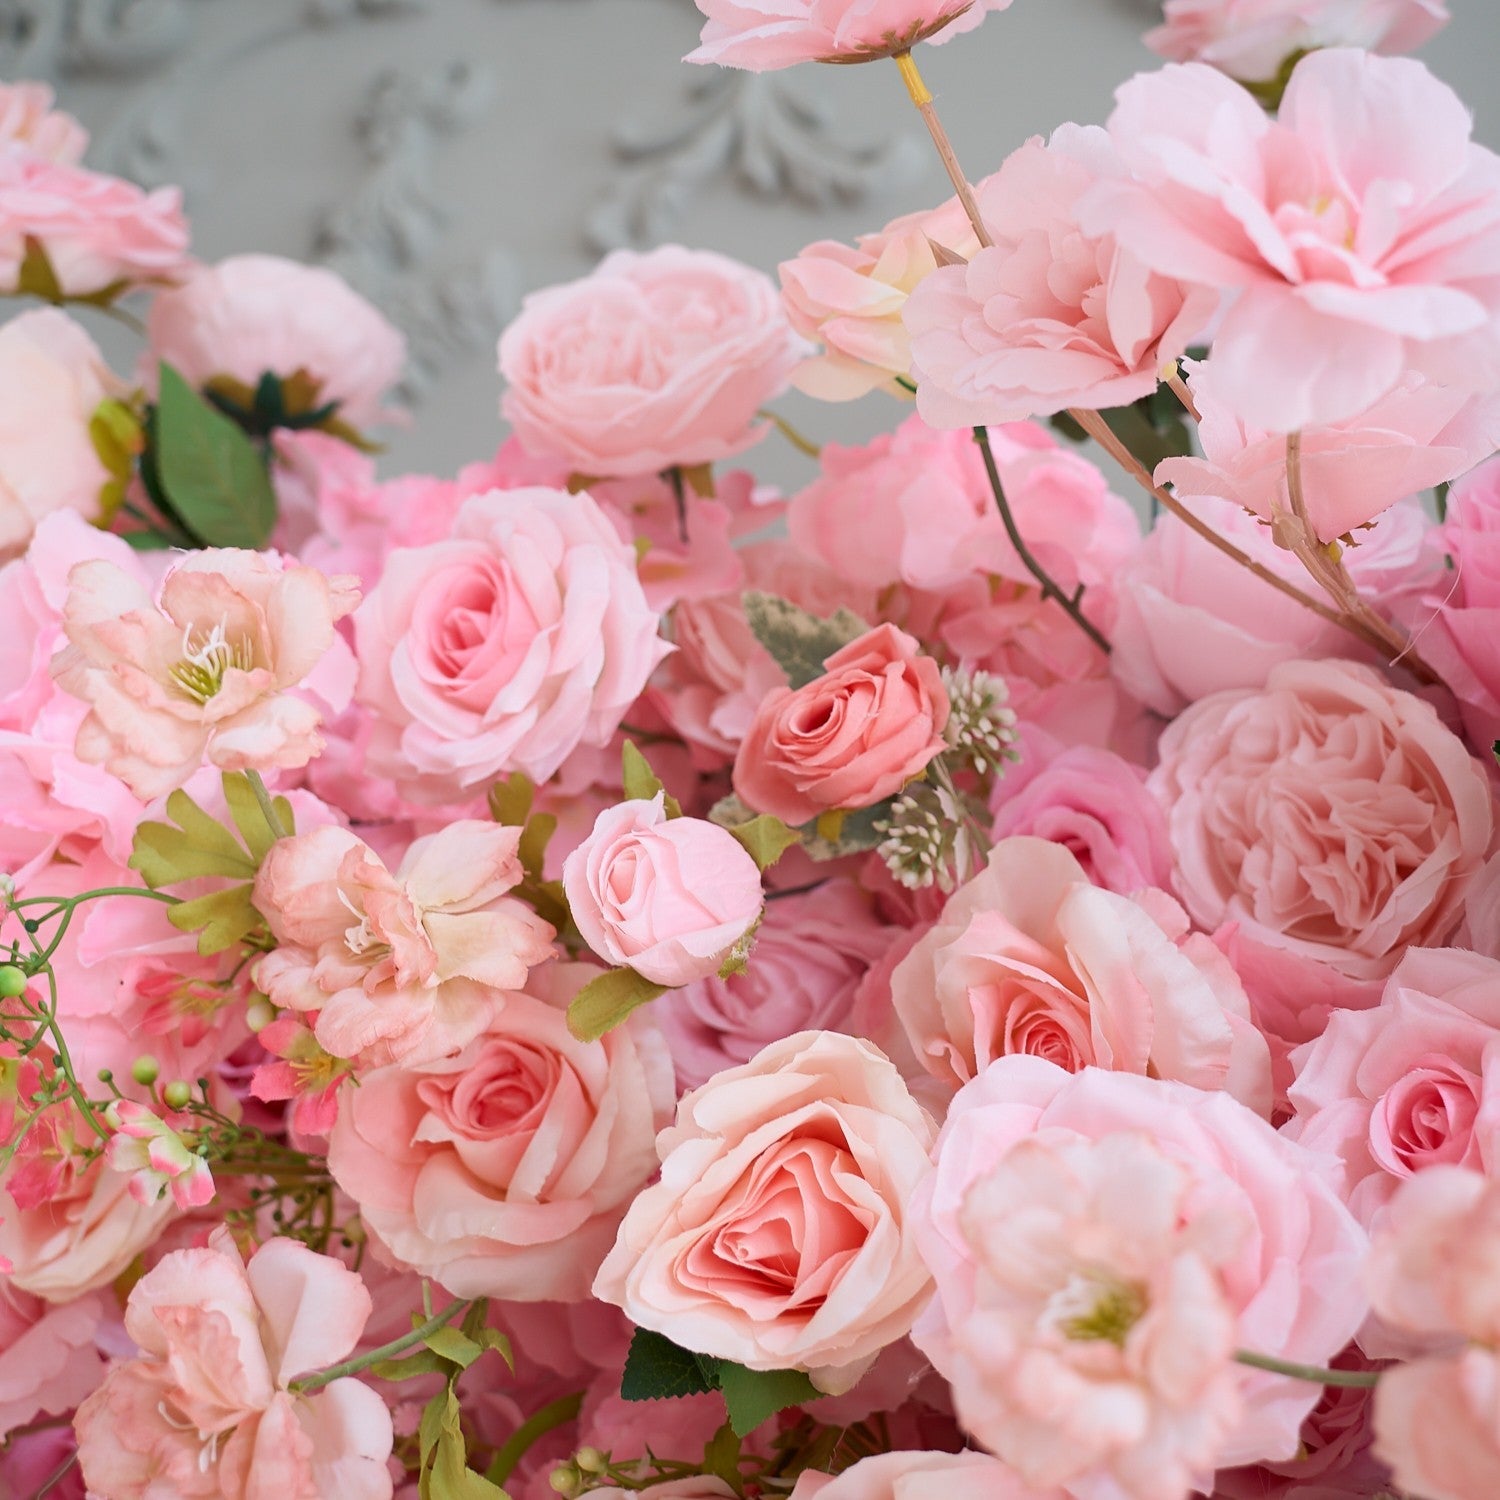 The pink roses flower wall looks vivid and lifelike.